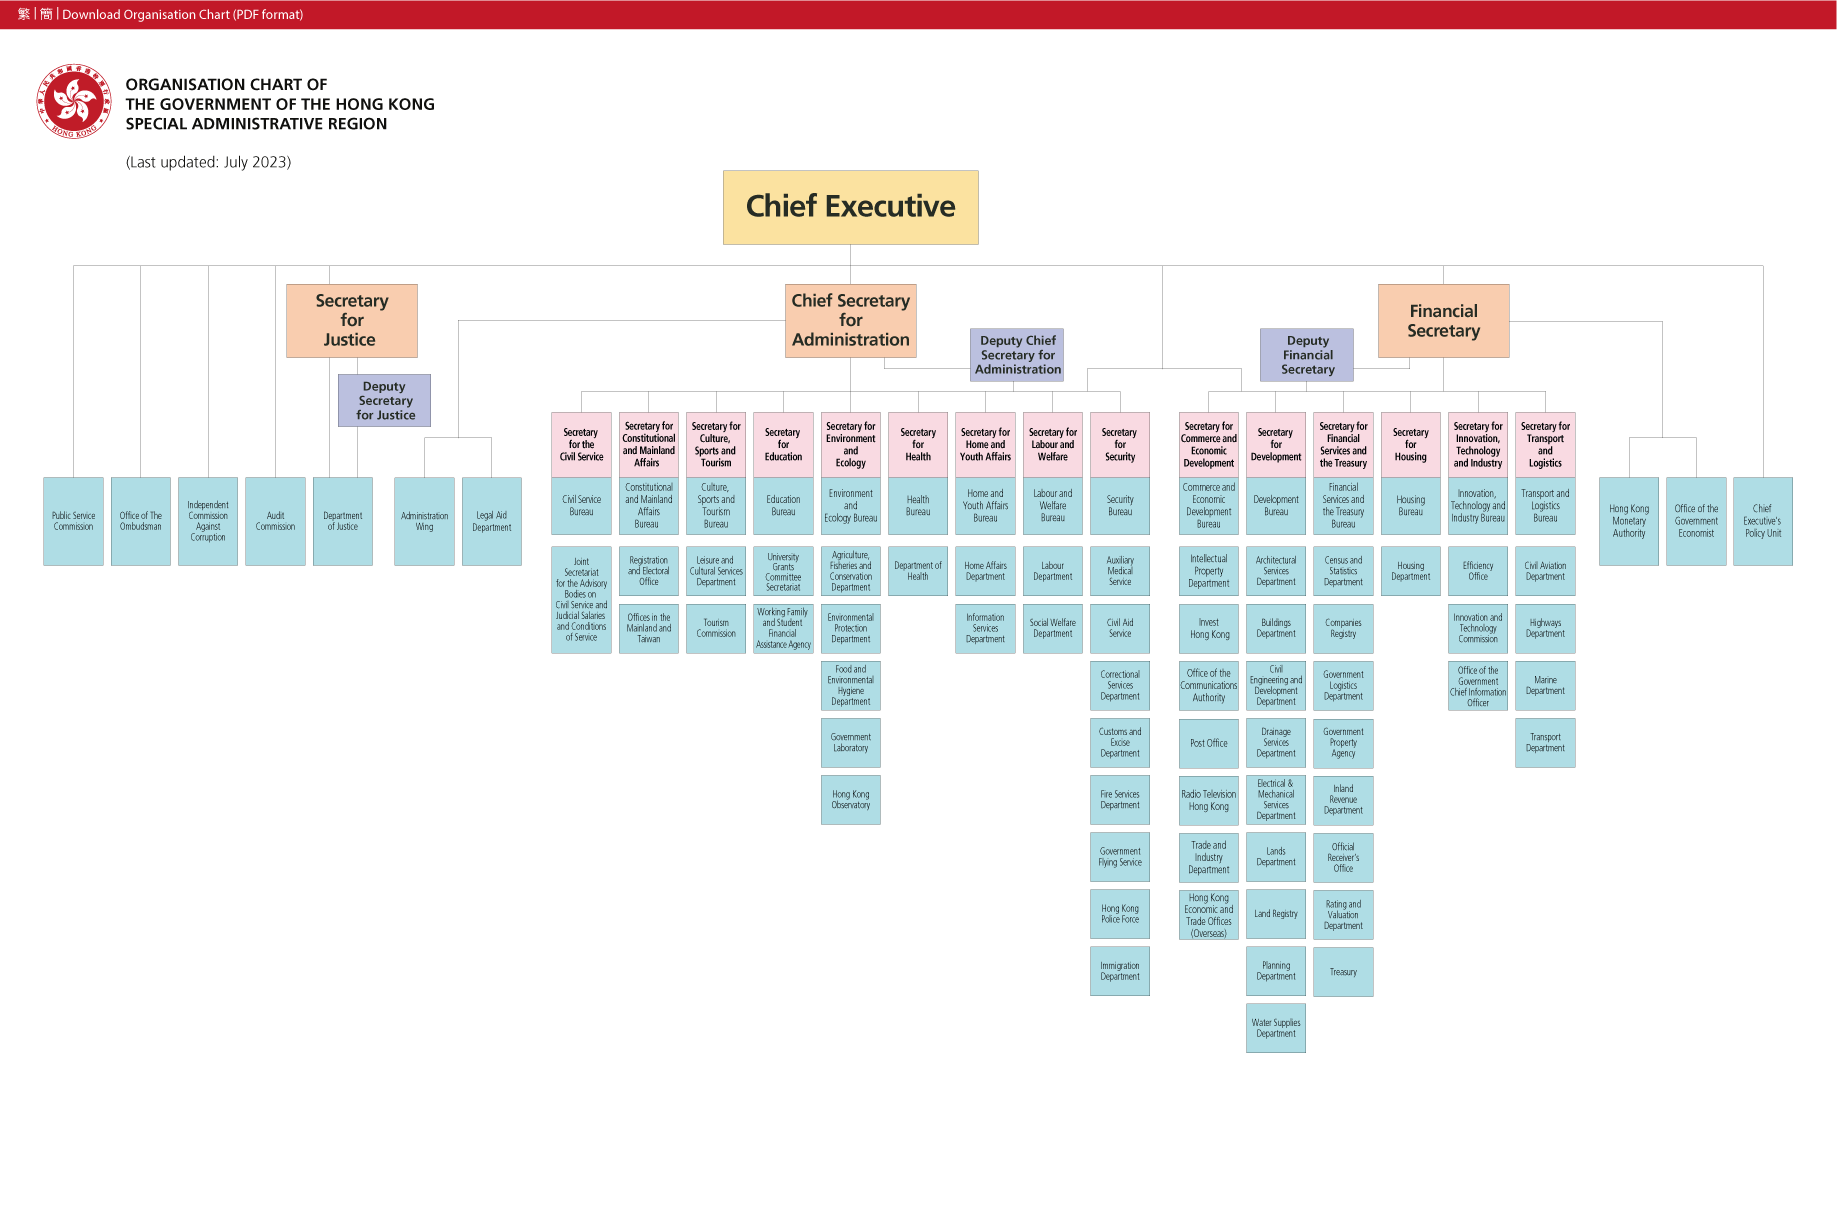 Organisation Chart of the Government of the HKSAR